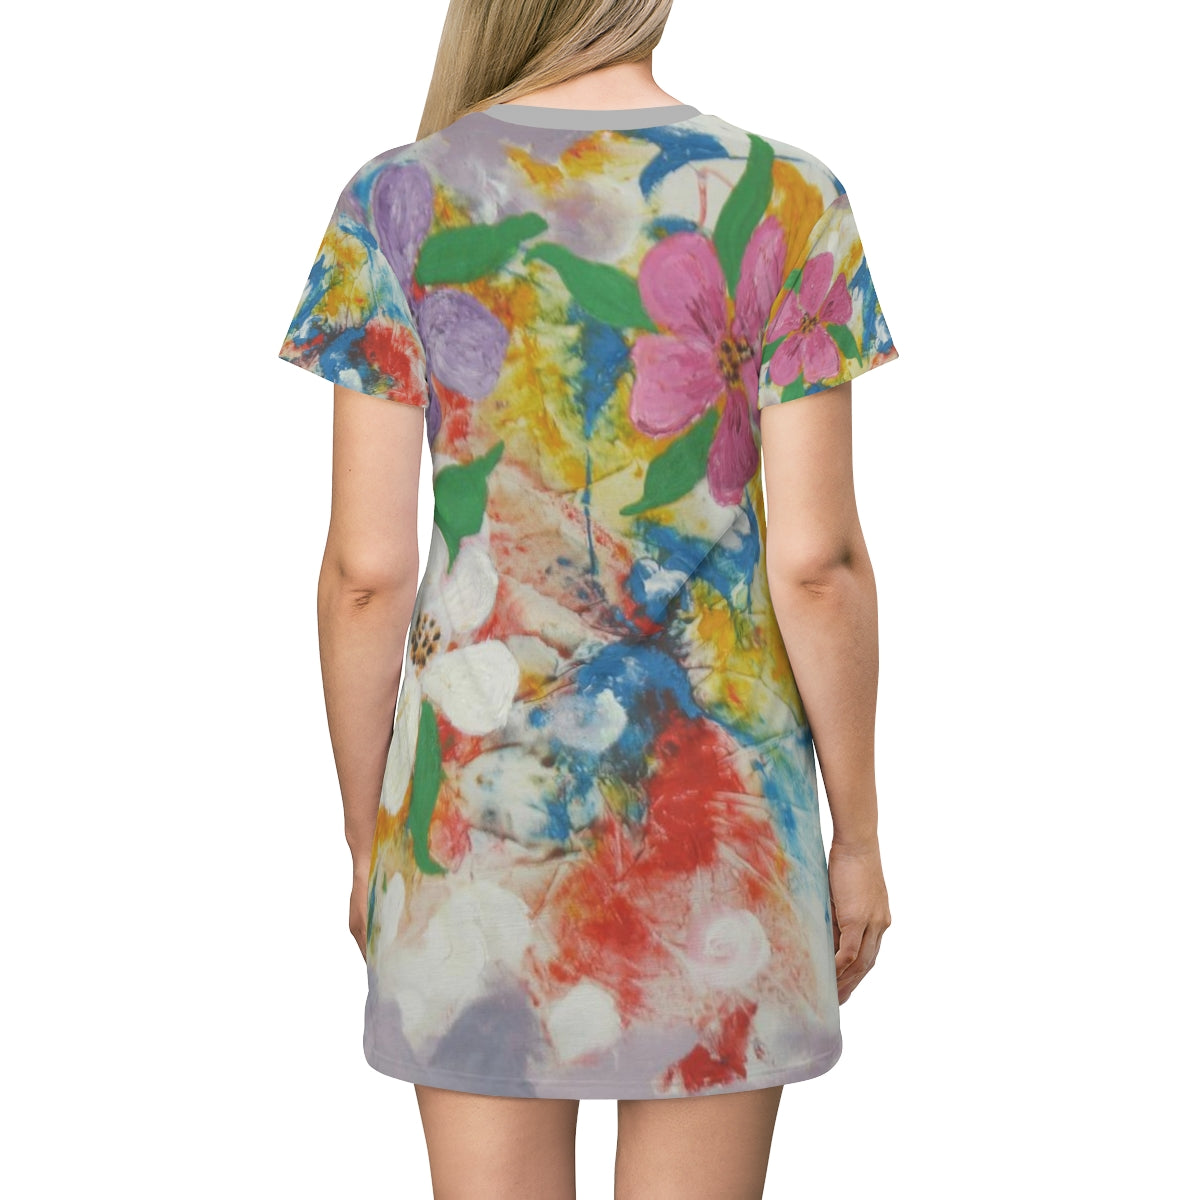 Oma Sonia's Peace-Love Floral T-Shirt Dress